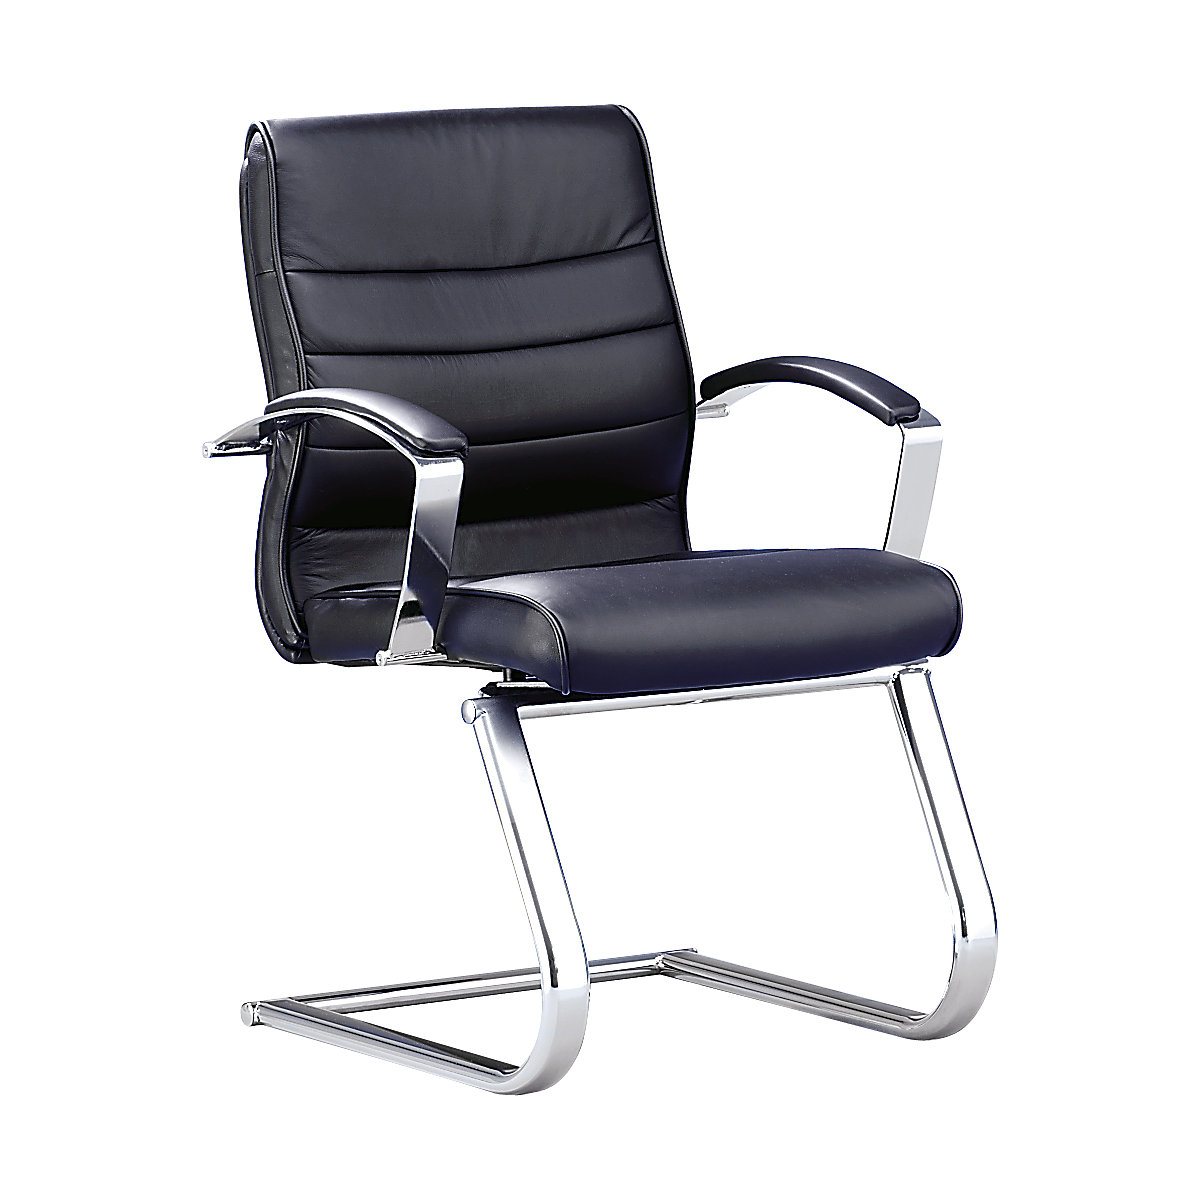 Chair Black Leather Kaiser Kraft, Small Leather Easy Chairs